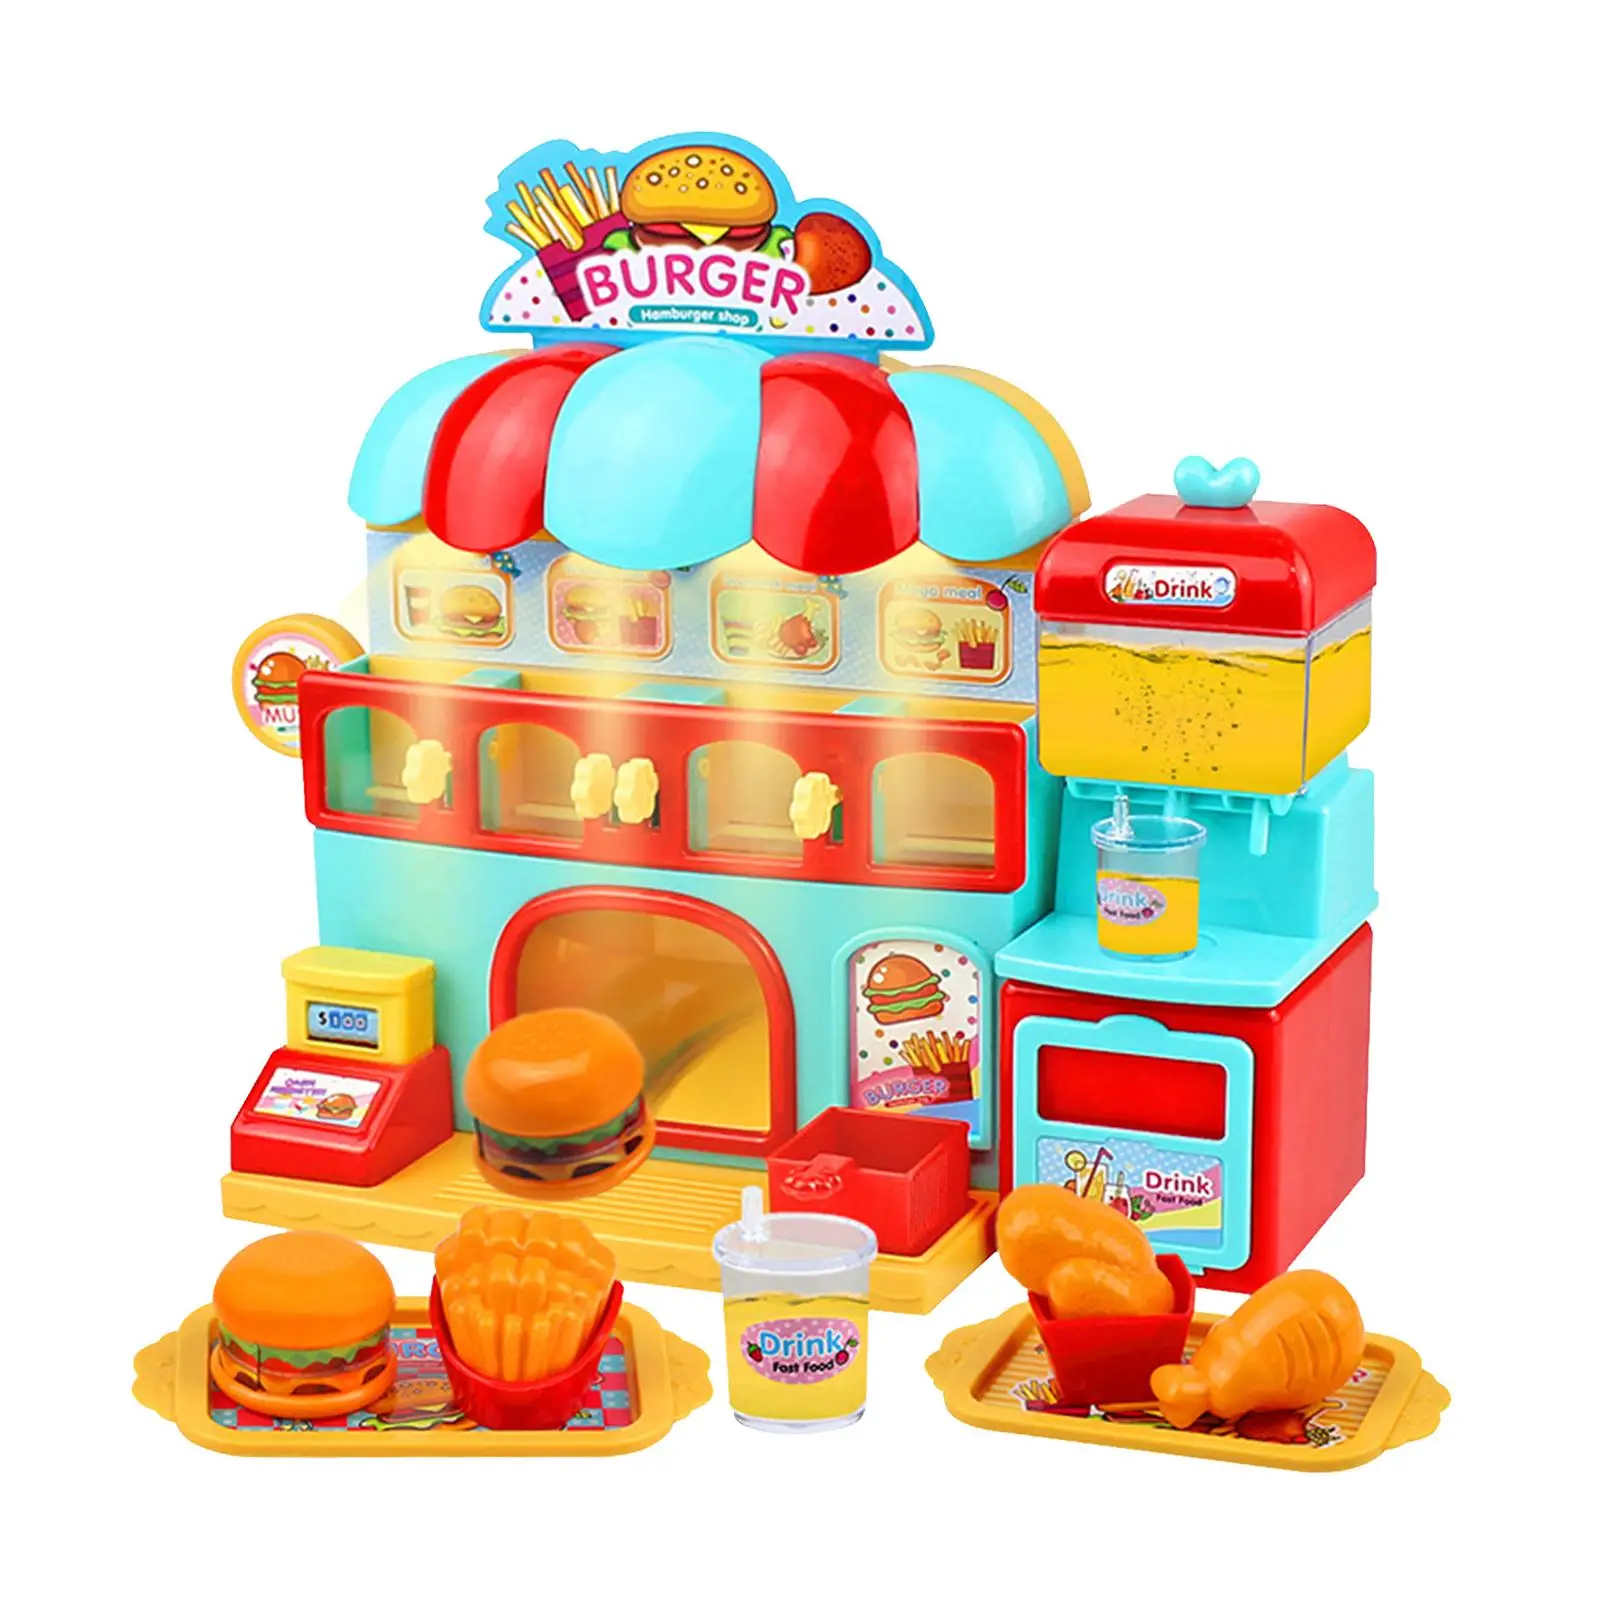 Burgers Shop Toy Role Play Fastfood French Fries Simulation Pretend Play Toy Kitchen Toys Foods Burger for Boys Kids Girls Gift